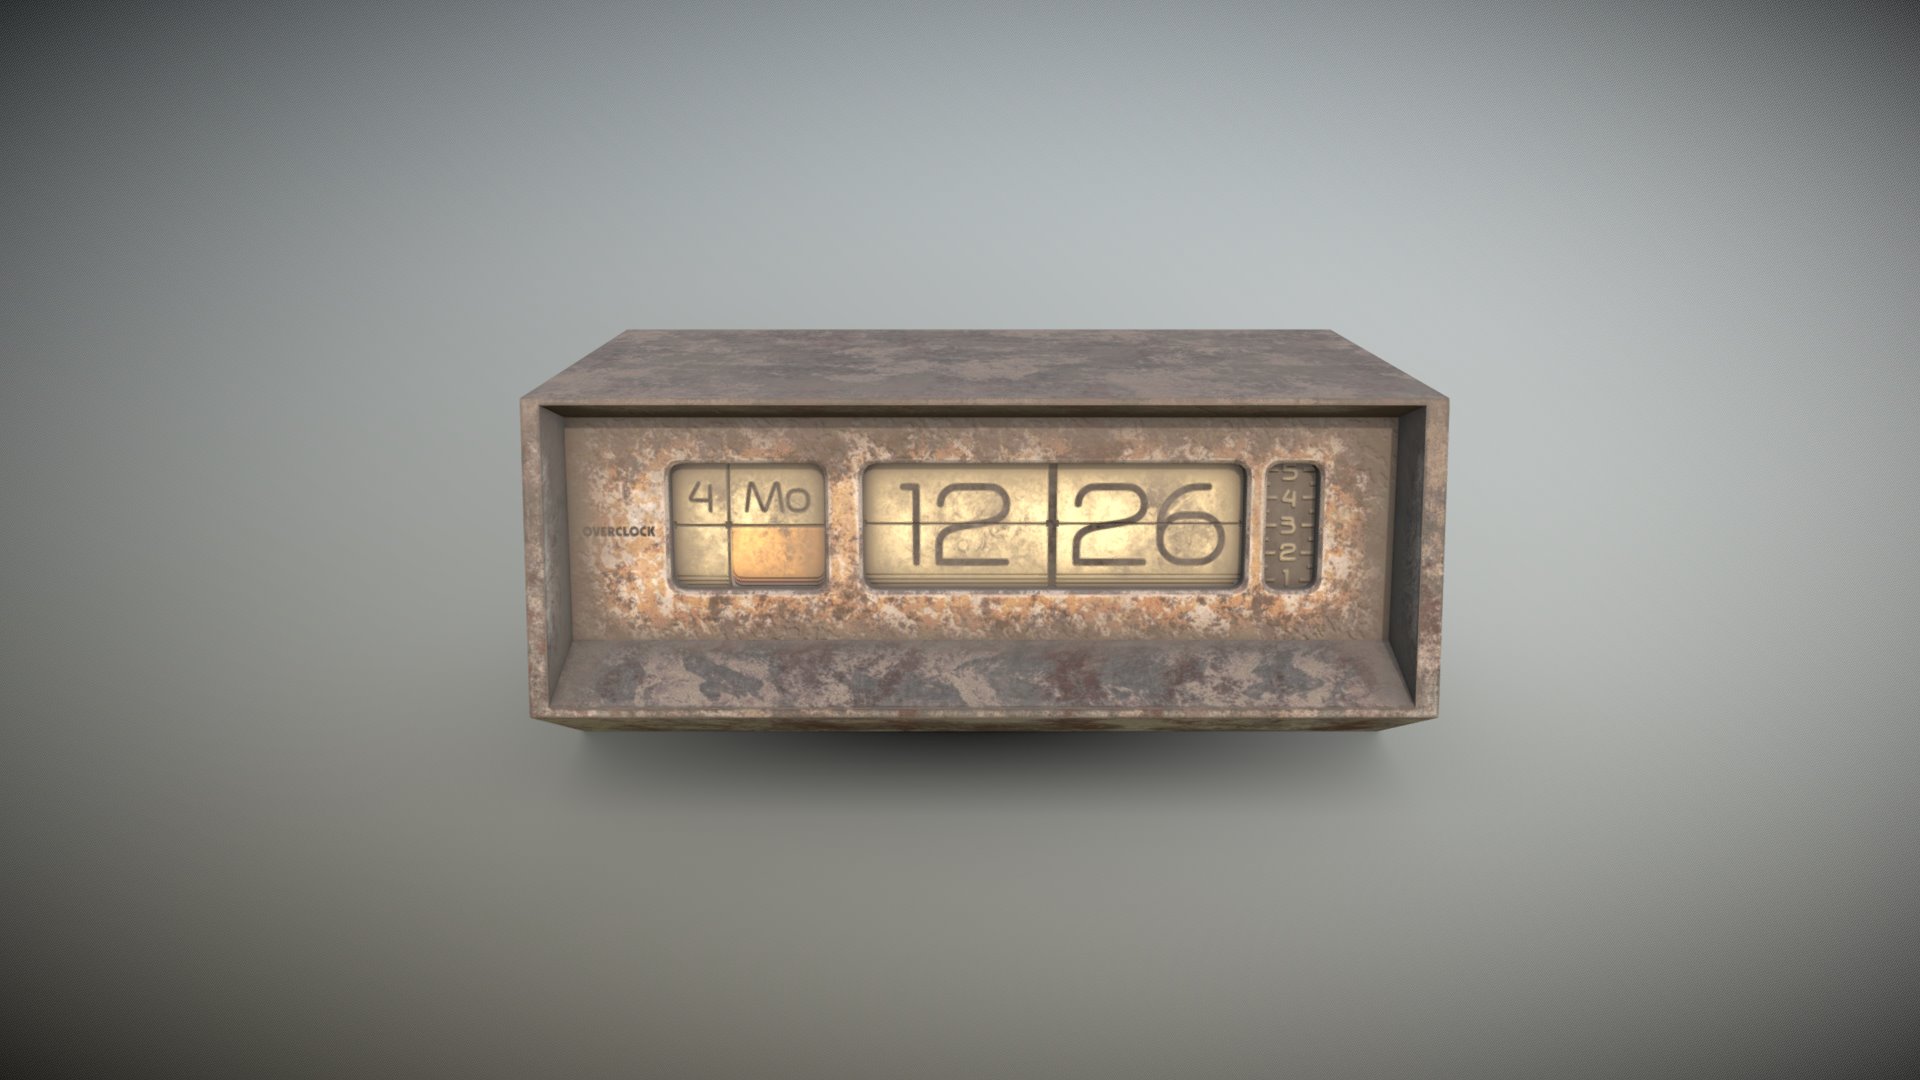 3D model Dirty desktop flipclock 18 of 20 - This is a 3D model of the Dirty desktop flipclock 18 of 20. The 3D model is about a rectangular object with a number on it.